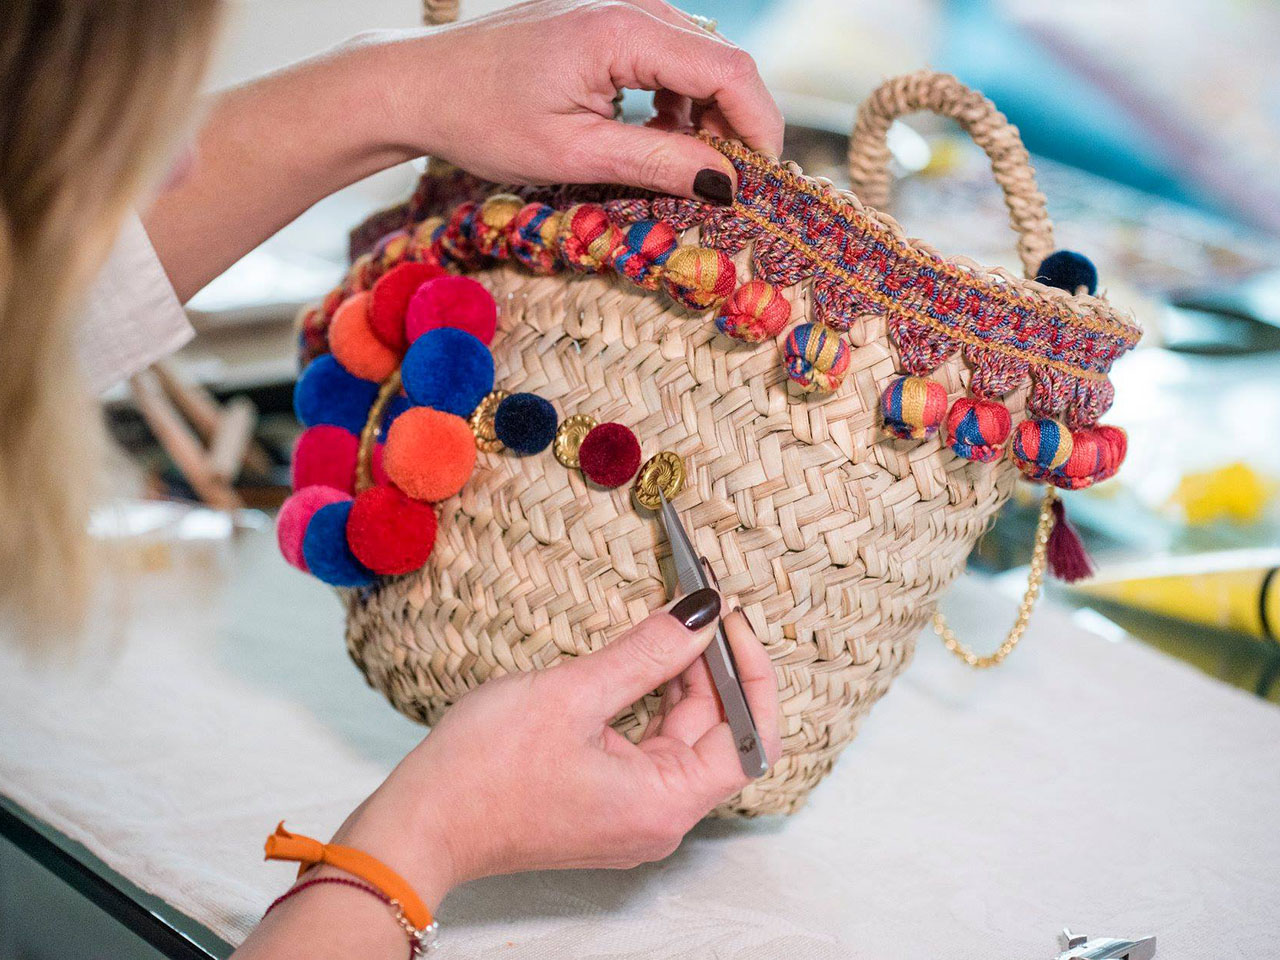 artisan decorating a "crow's nest", a woven straw bag